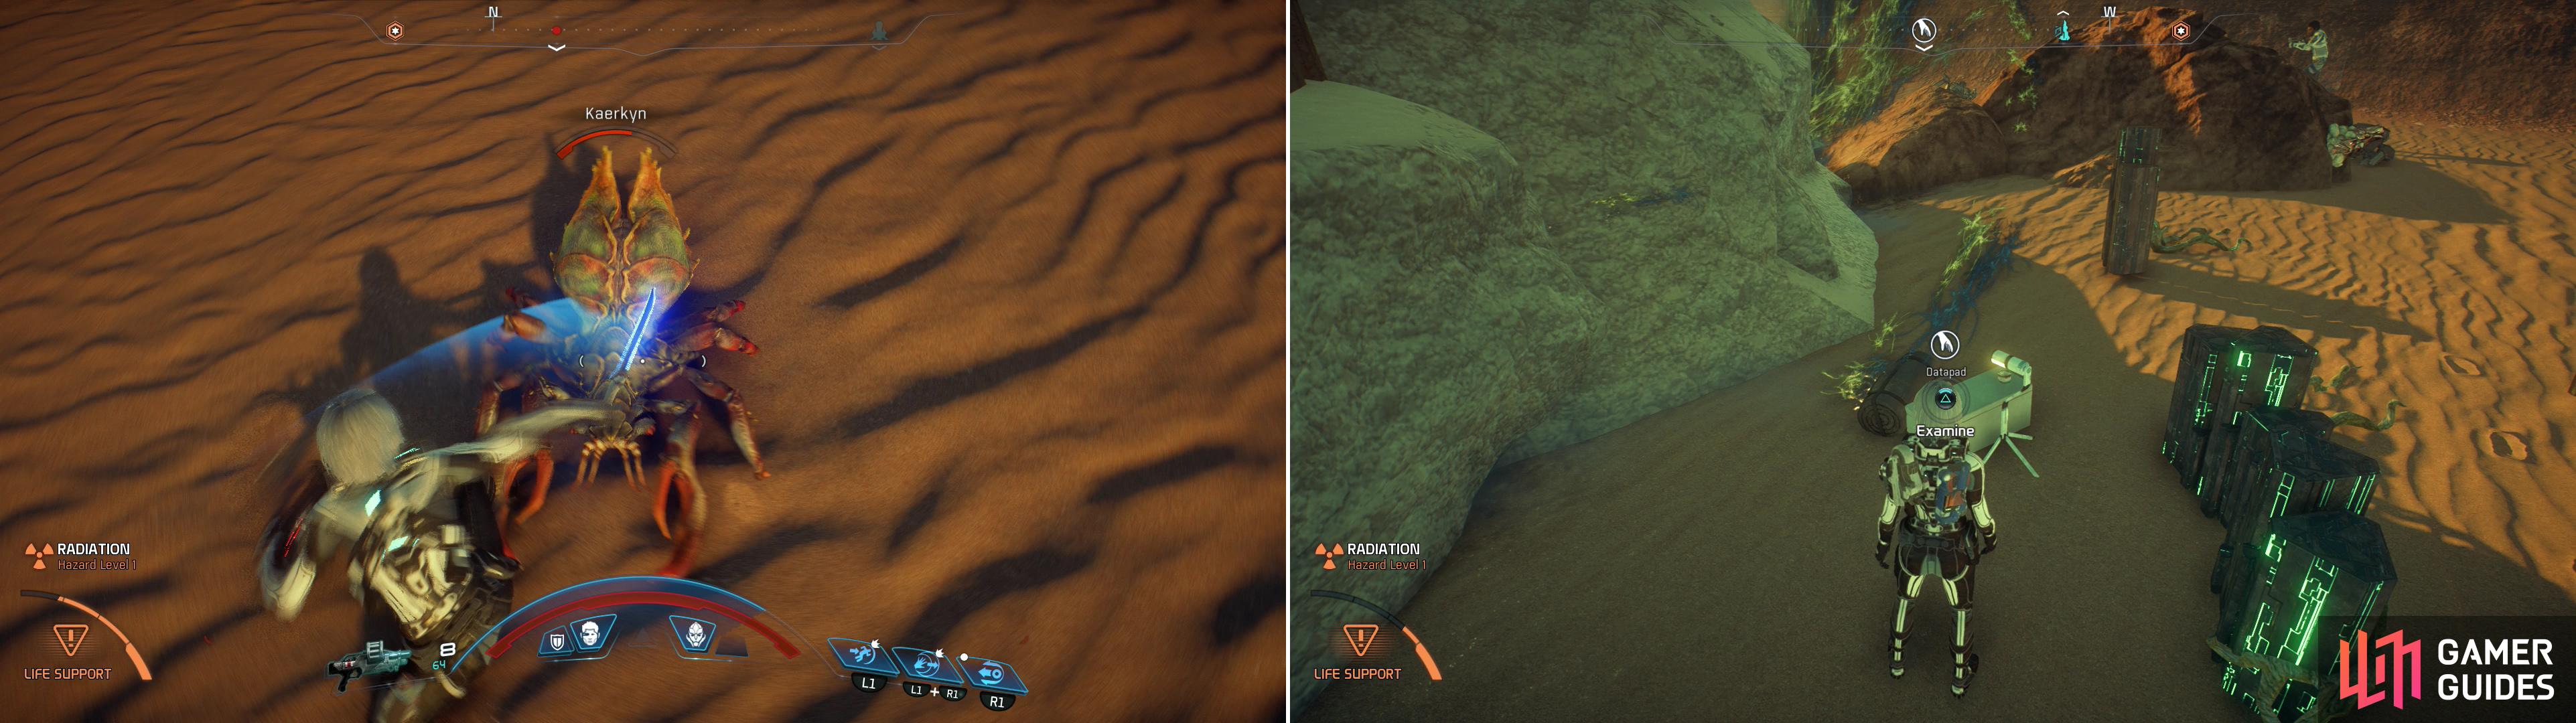 Killing Kaerkyns in the wilderness of Eos can prove quite lucrative (left). Finding Datapads at random Remnant sites will start the quest Task: The Ghost of Promise (right).